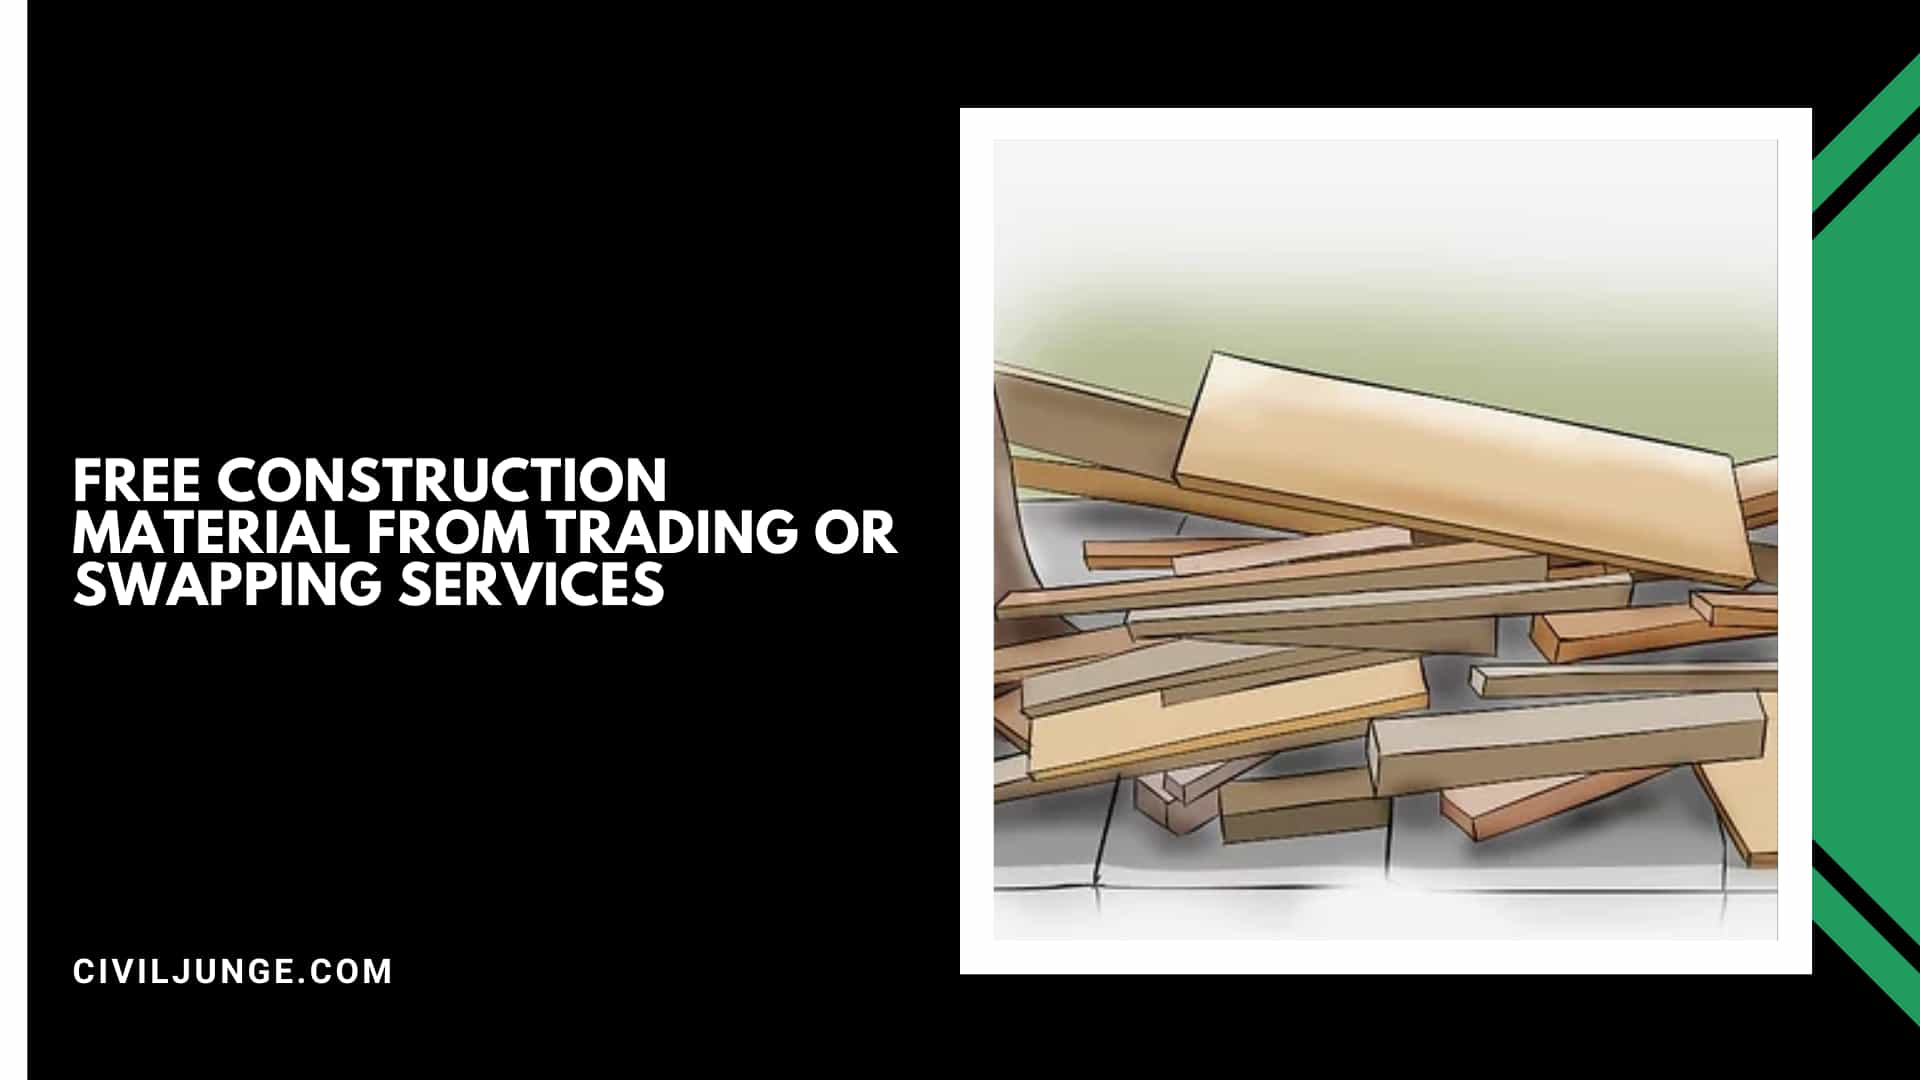 Free Construction Material from Trading or Swapping Services